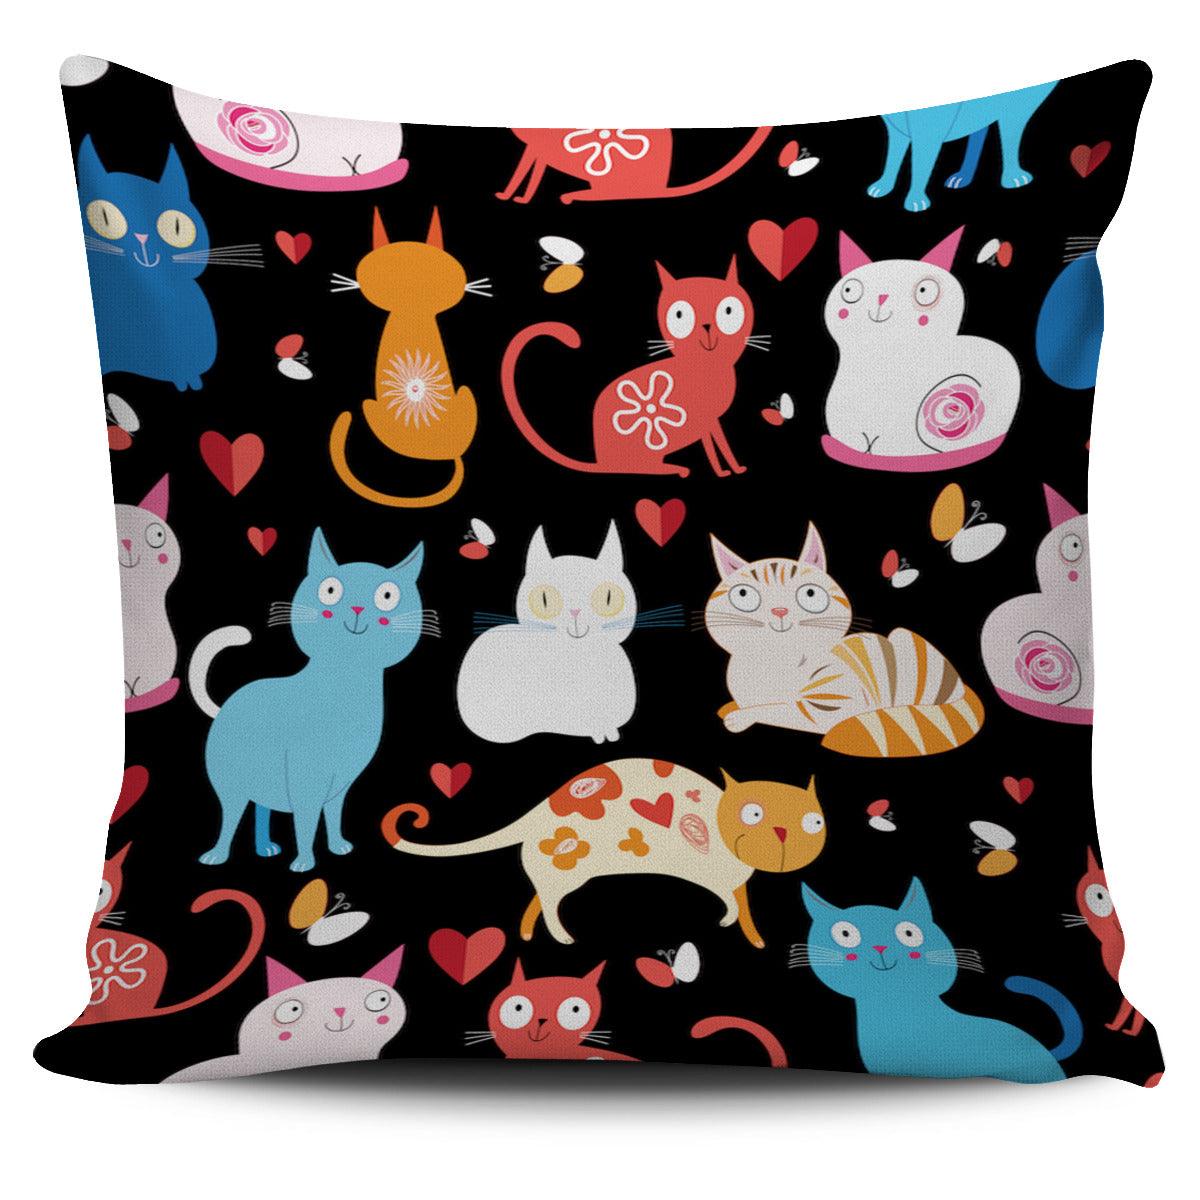 Colorful Grumpy Cat Pillow Cover